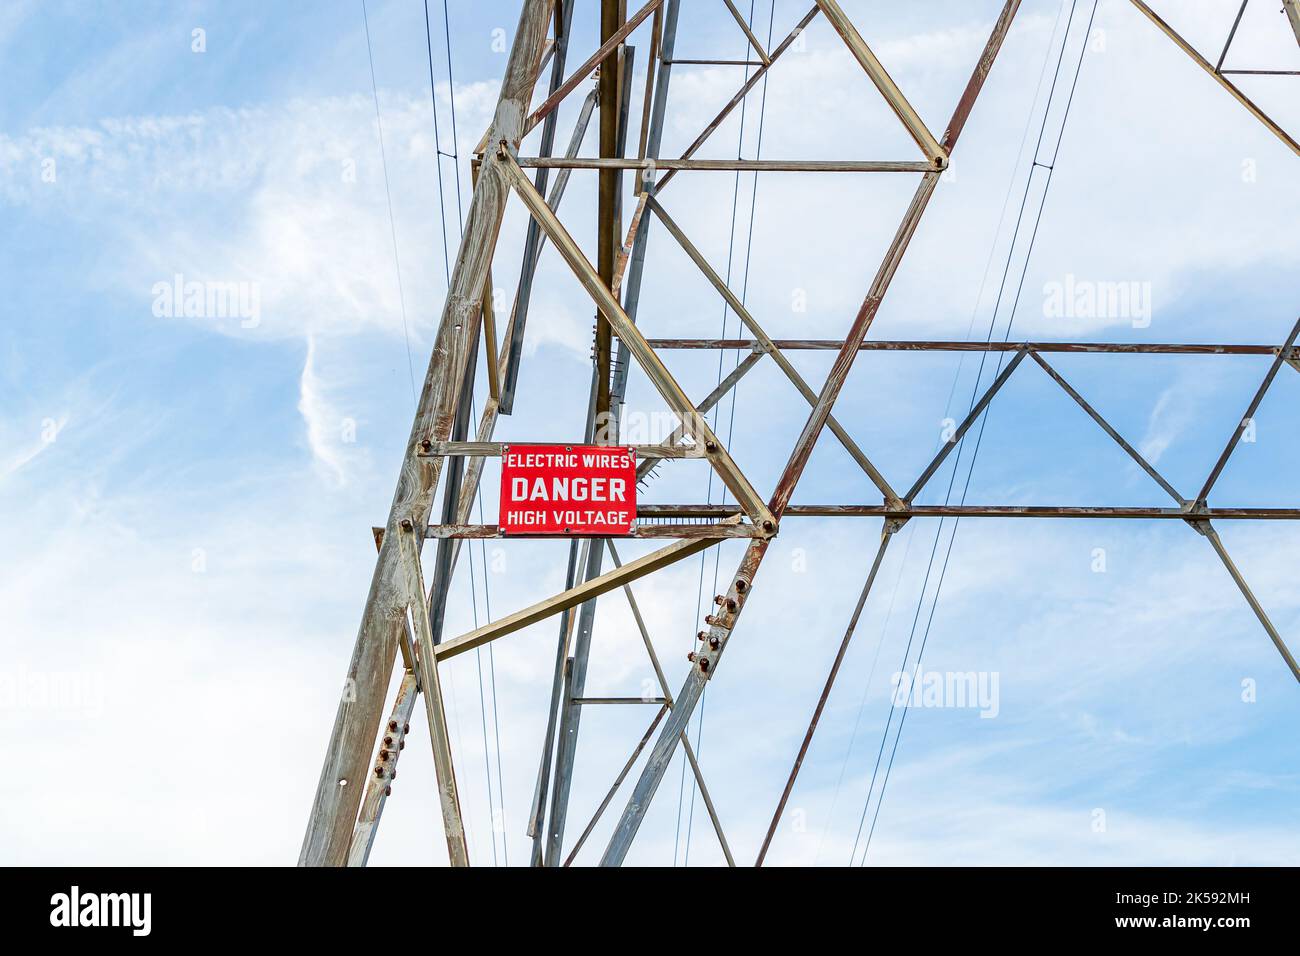 High voltage warning sign on electrical utility tower. Electricity, power lines, and electrical grid safety concept Stock Photo